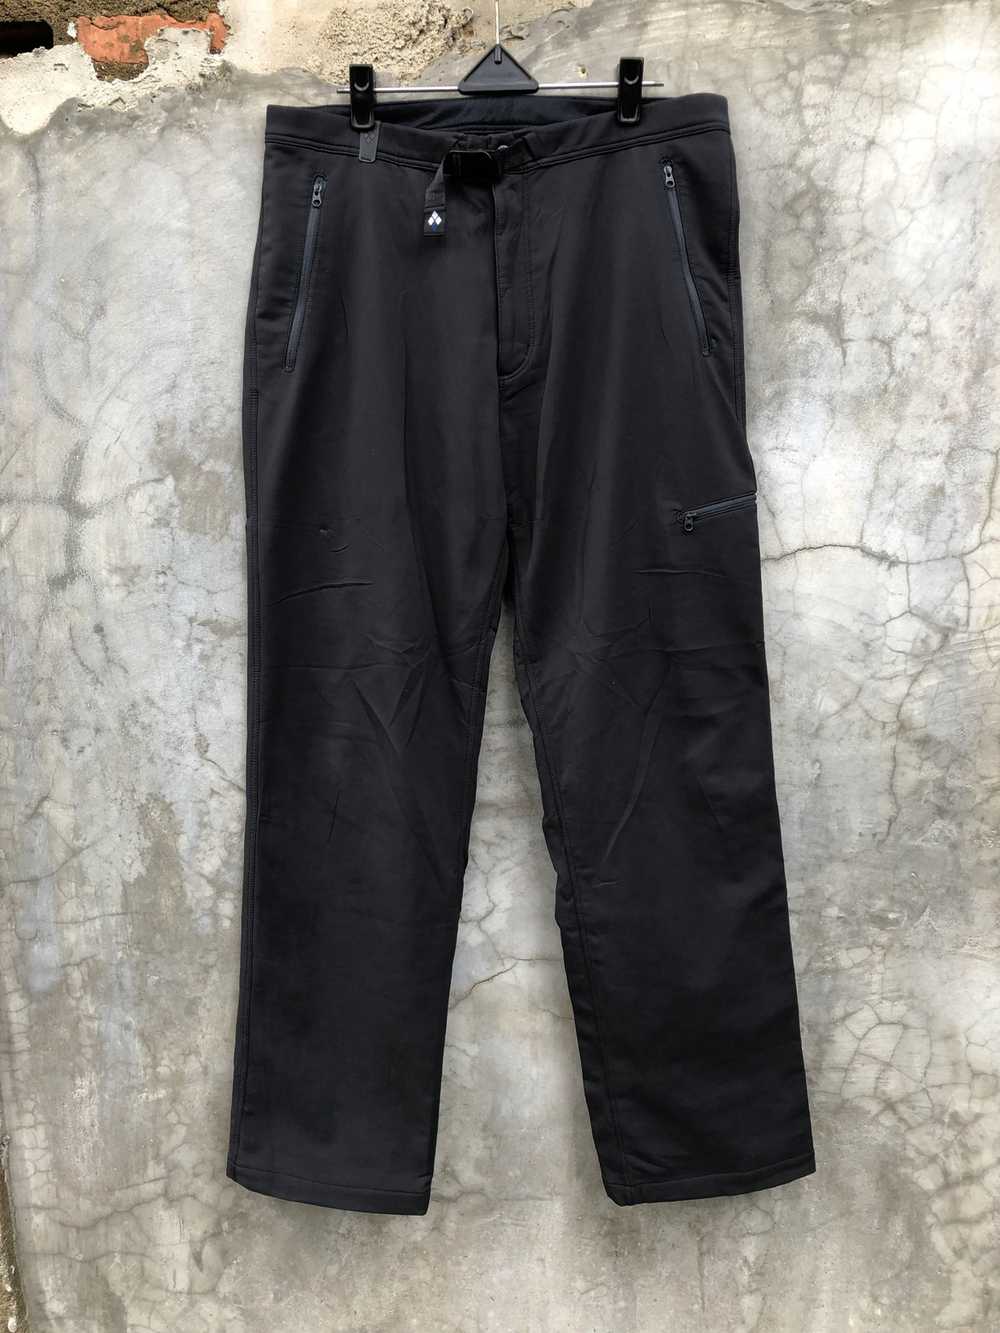 Montbell × Outdoor Life Montbell clima pro pants - image 1